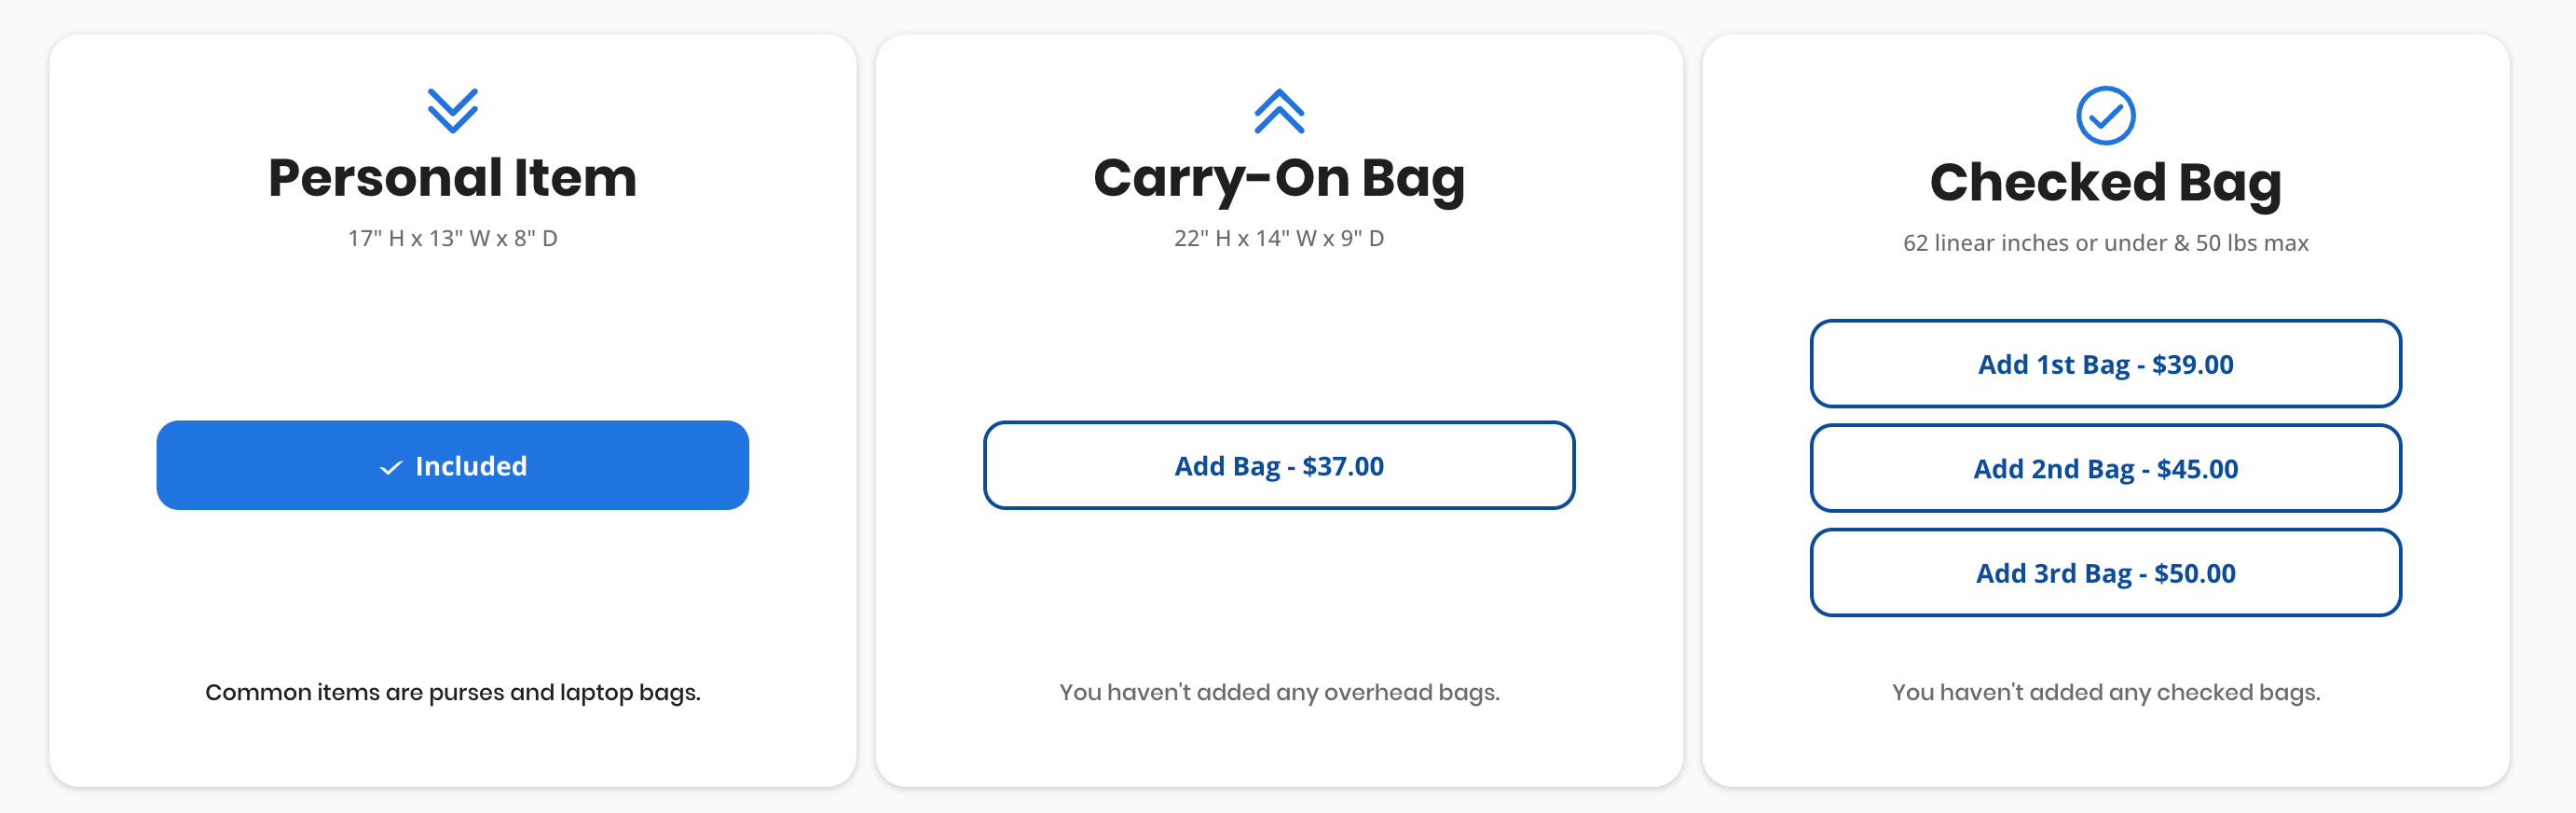 bag prices